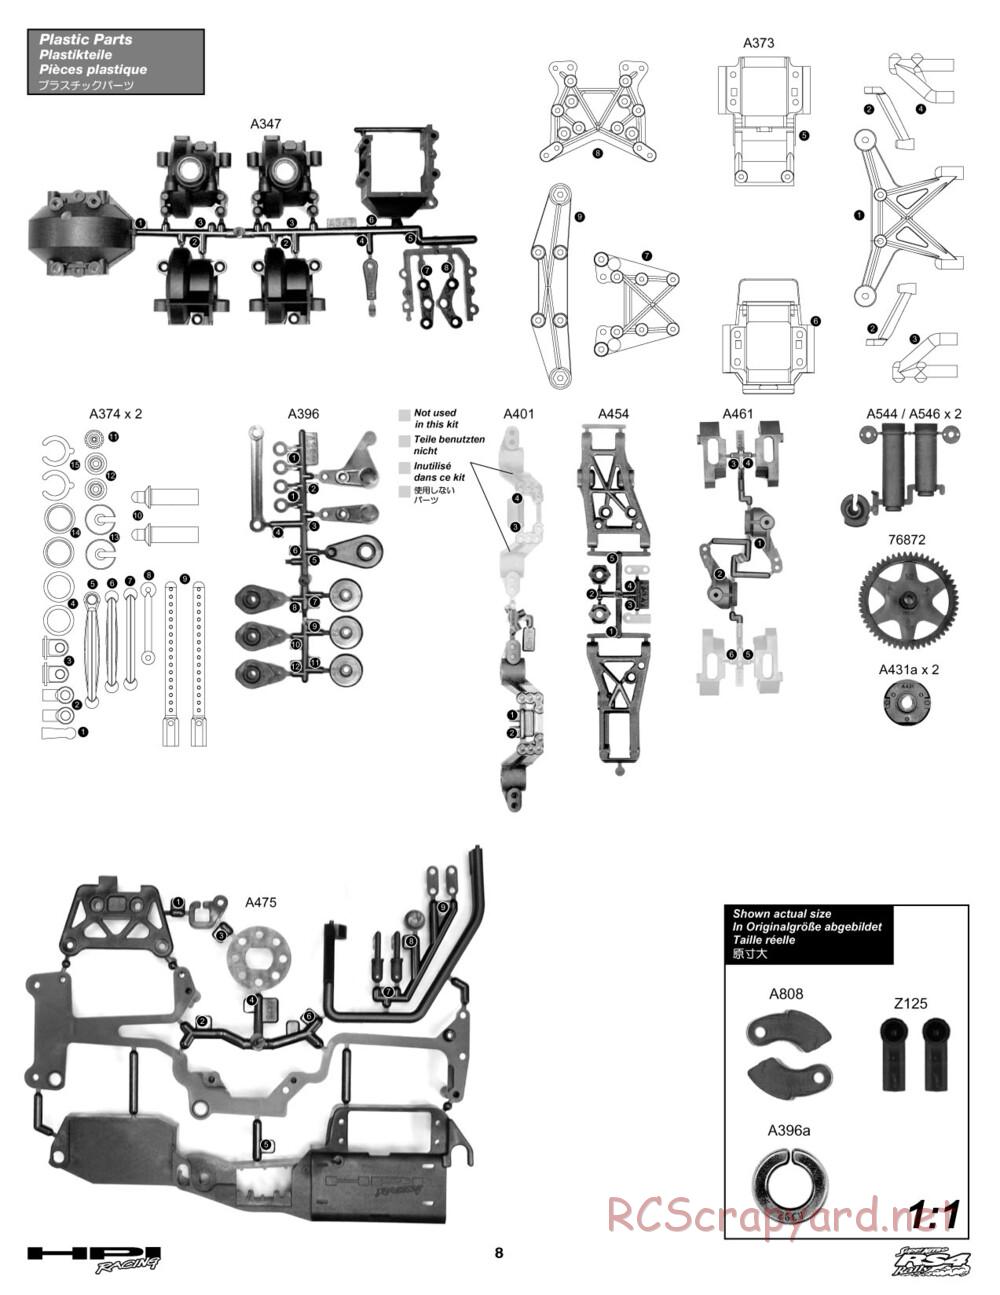 HPI - Super Nitro RS4 Rally - Manual - Page 8